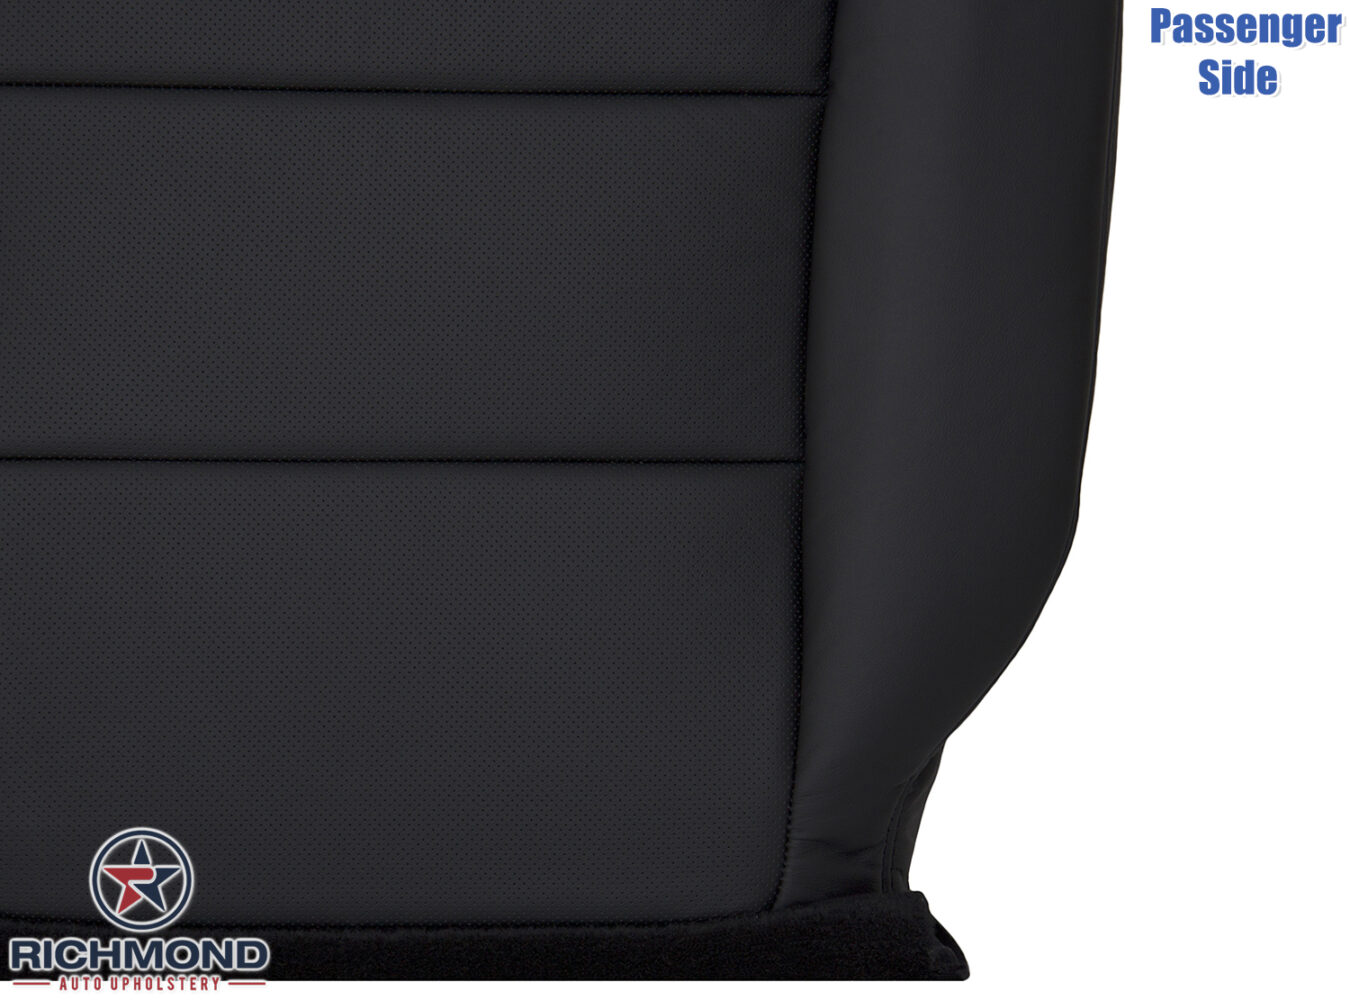 2005-2008 Acura RL Replacement Leather Seat Cover: Passenger Side